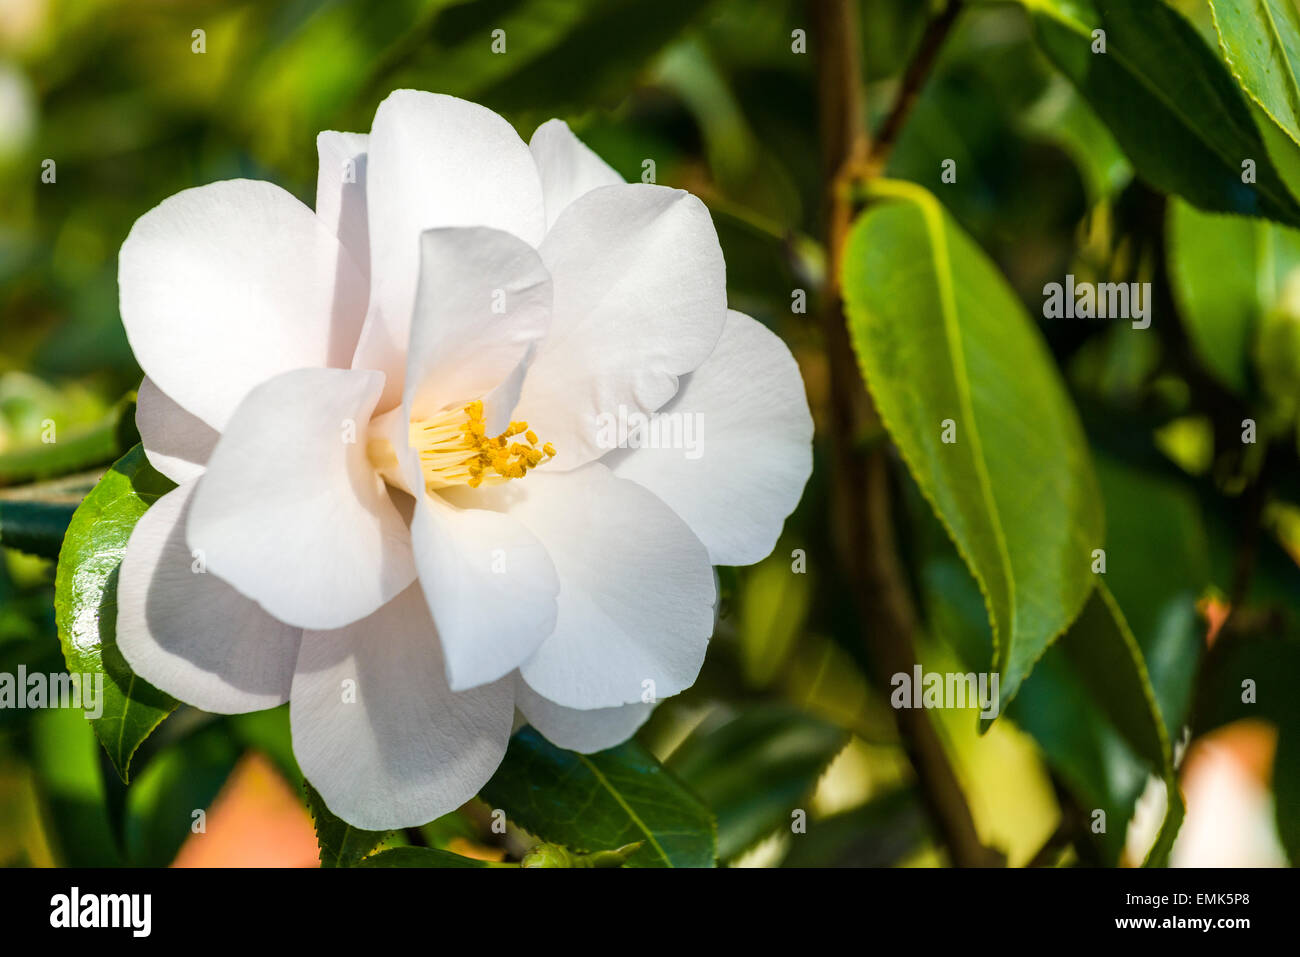 Japanese camellia (Camellia japonica) blooming, white blossom Stock Photo